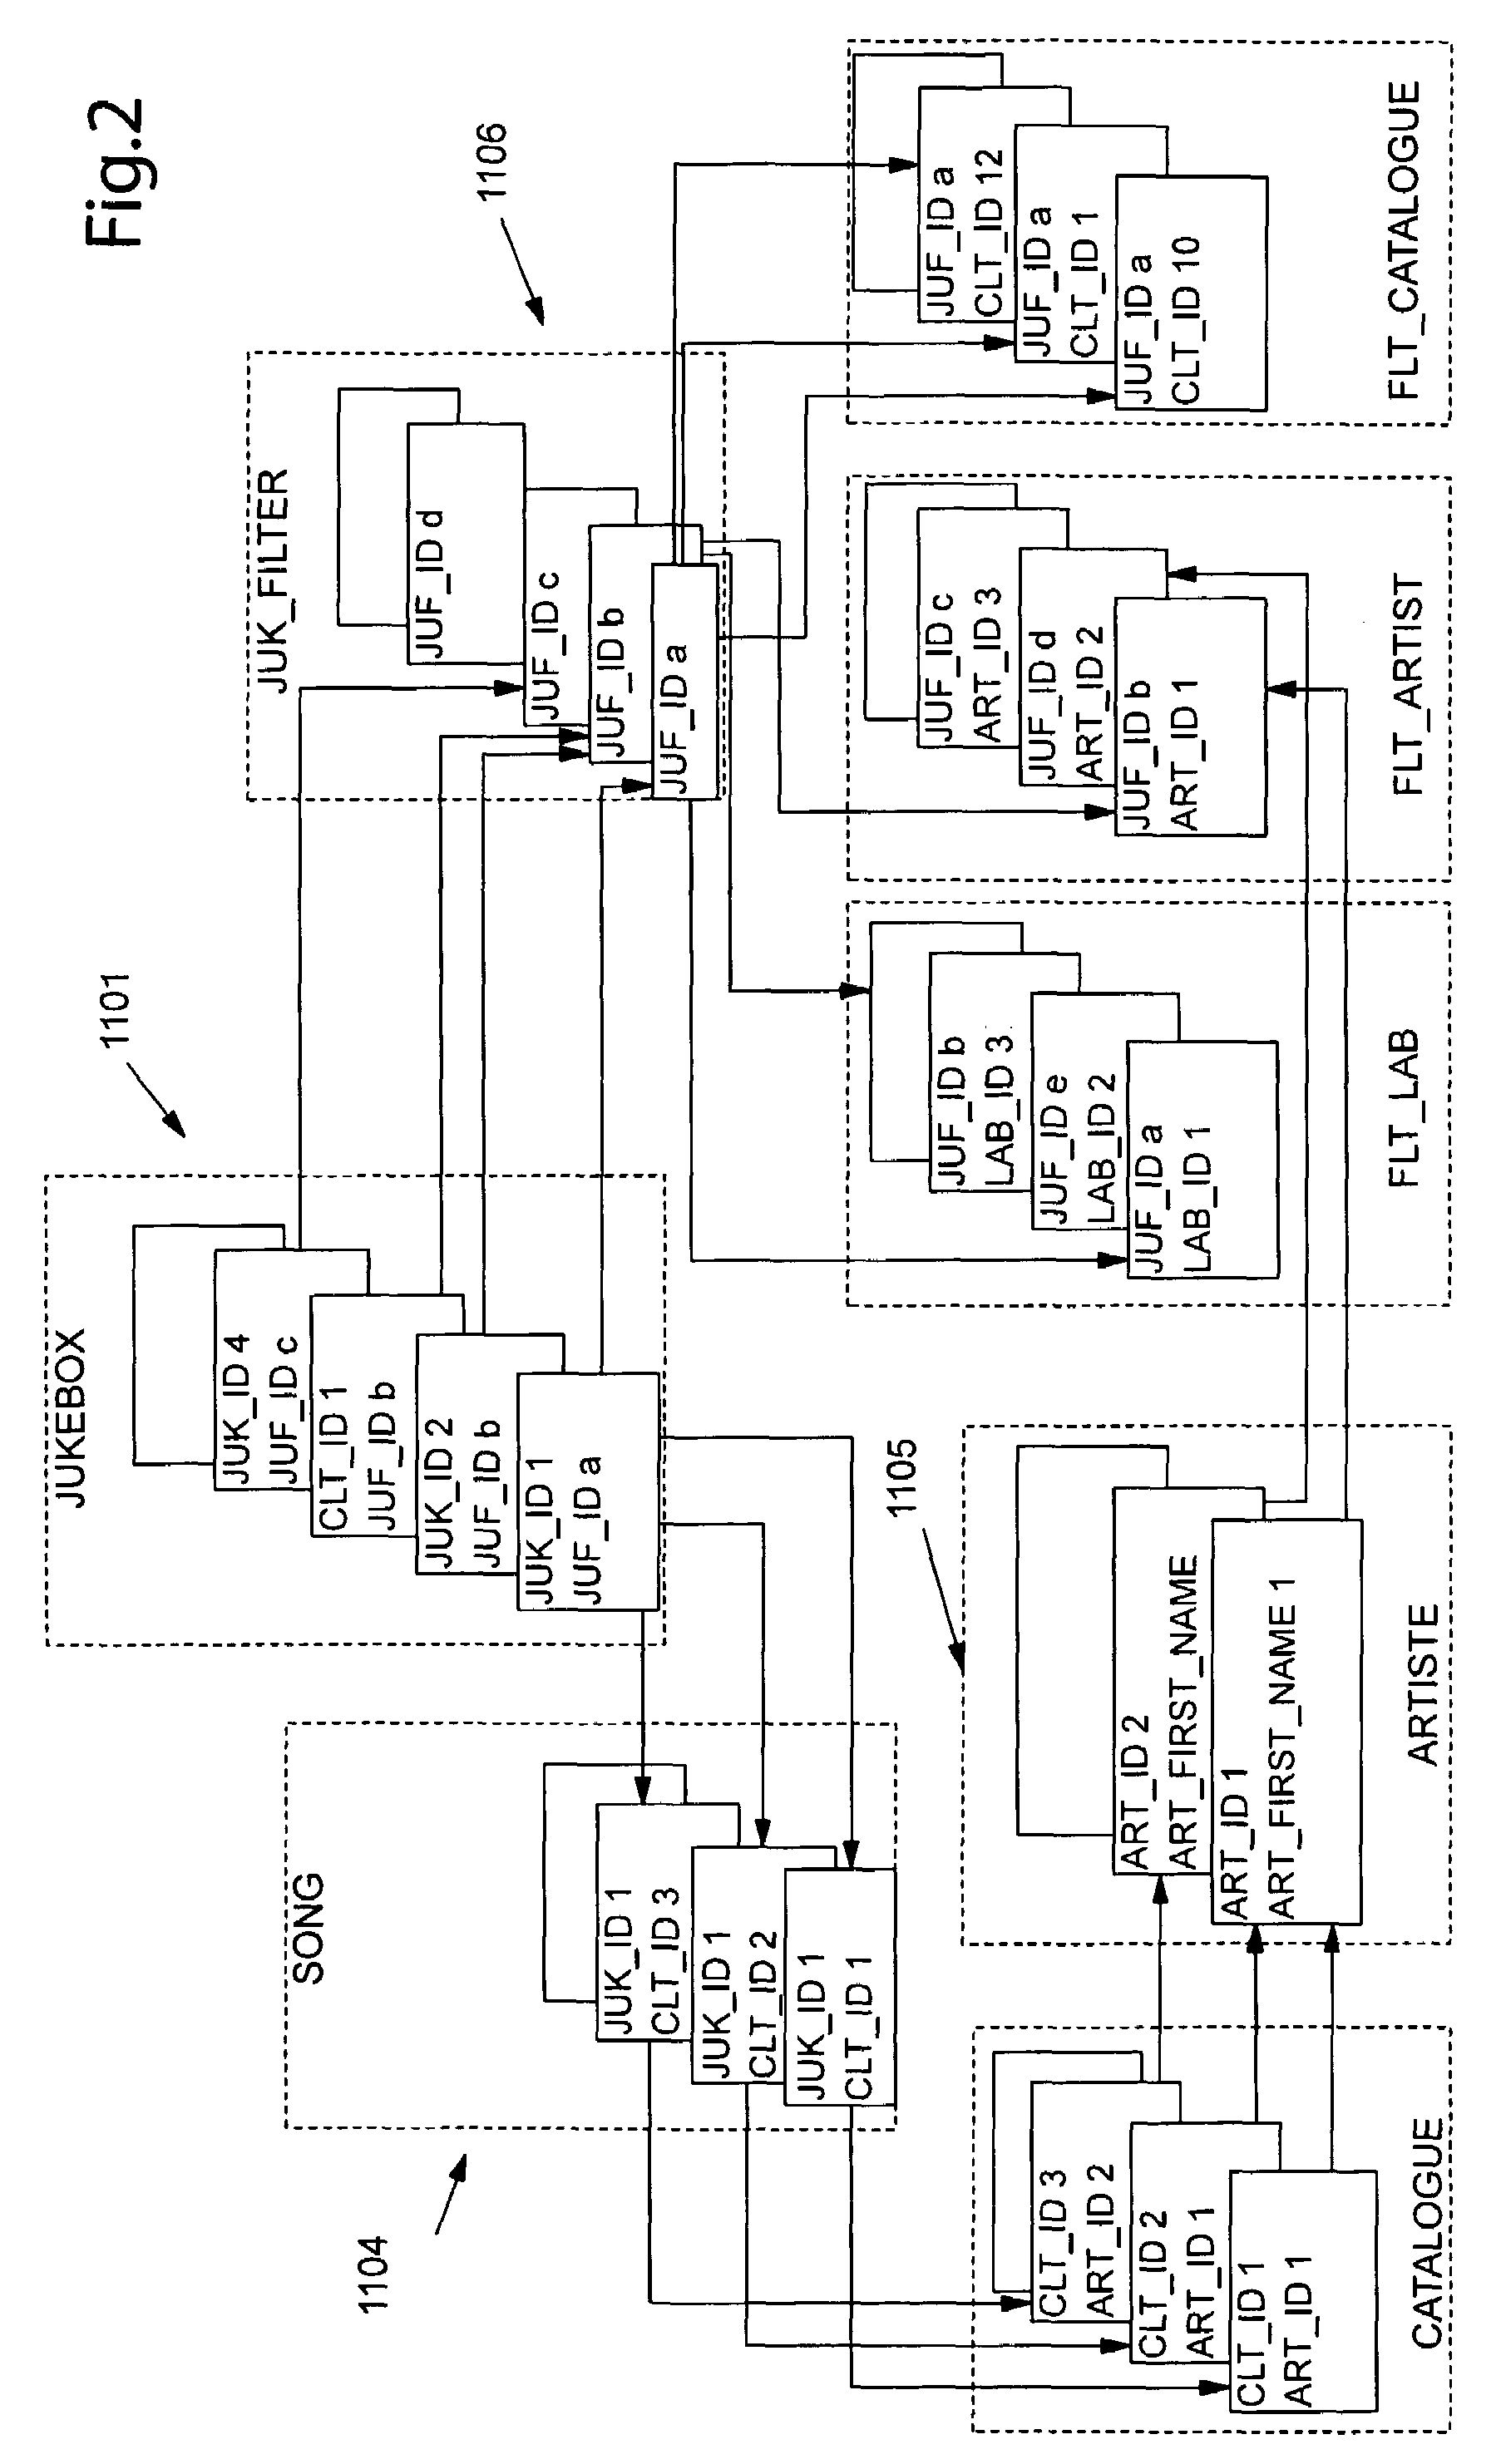 Device and process for remote management of a network of audiovisual information reproduction systems